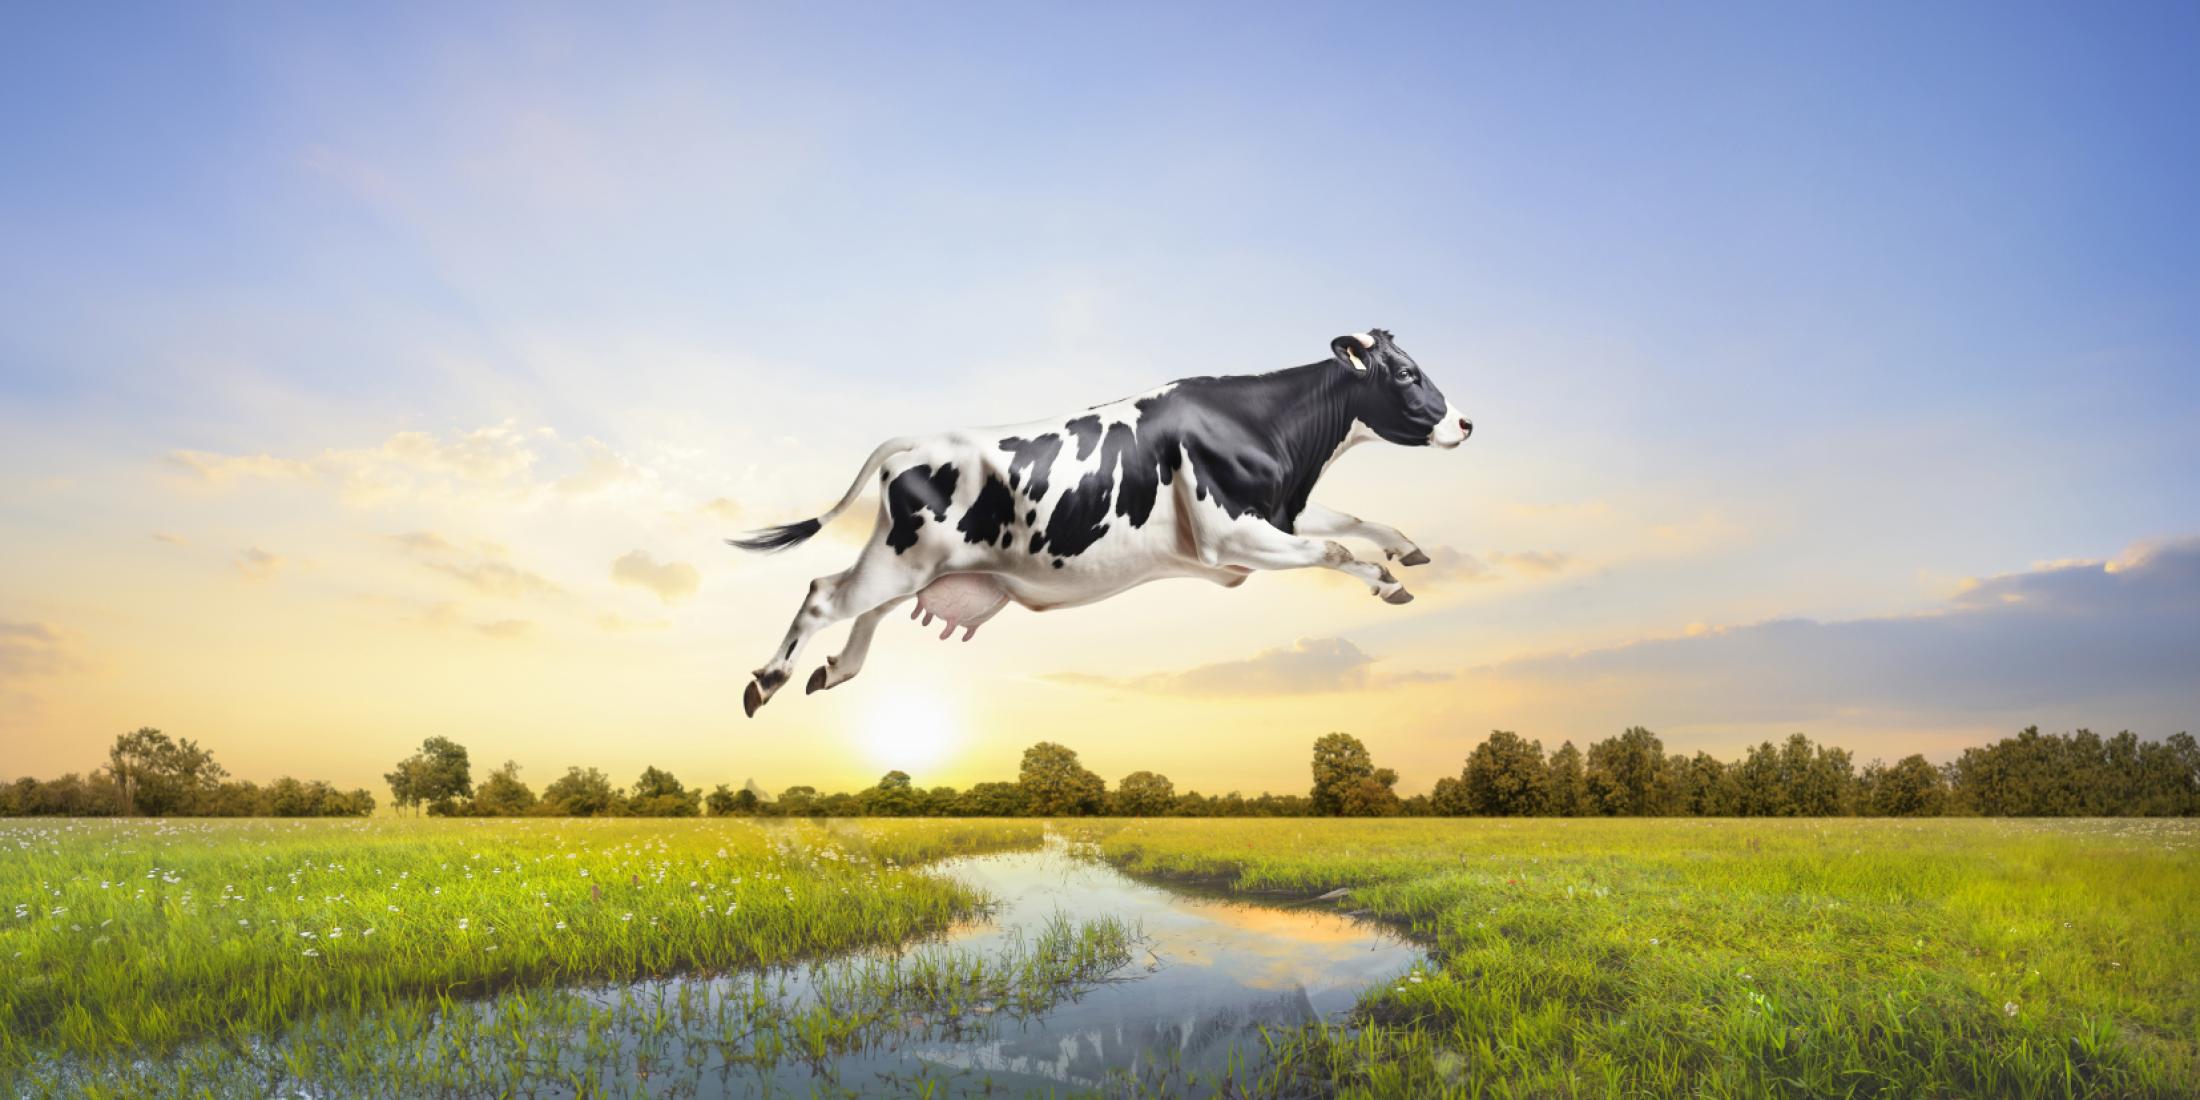 Cow jumping over a creek